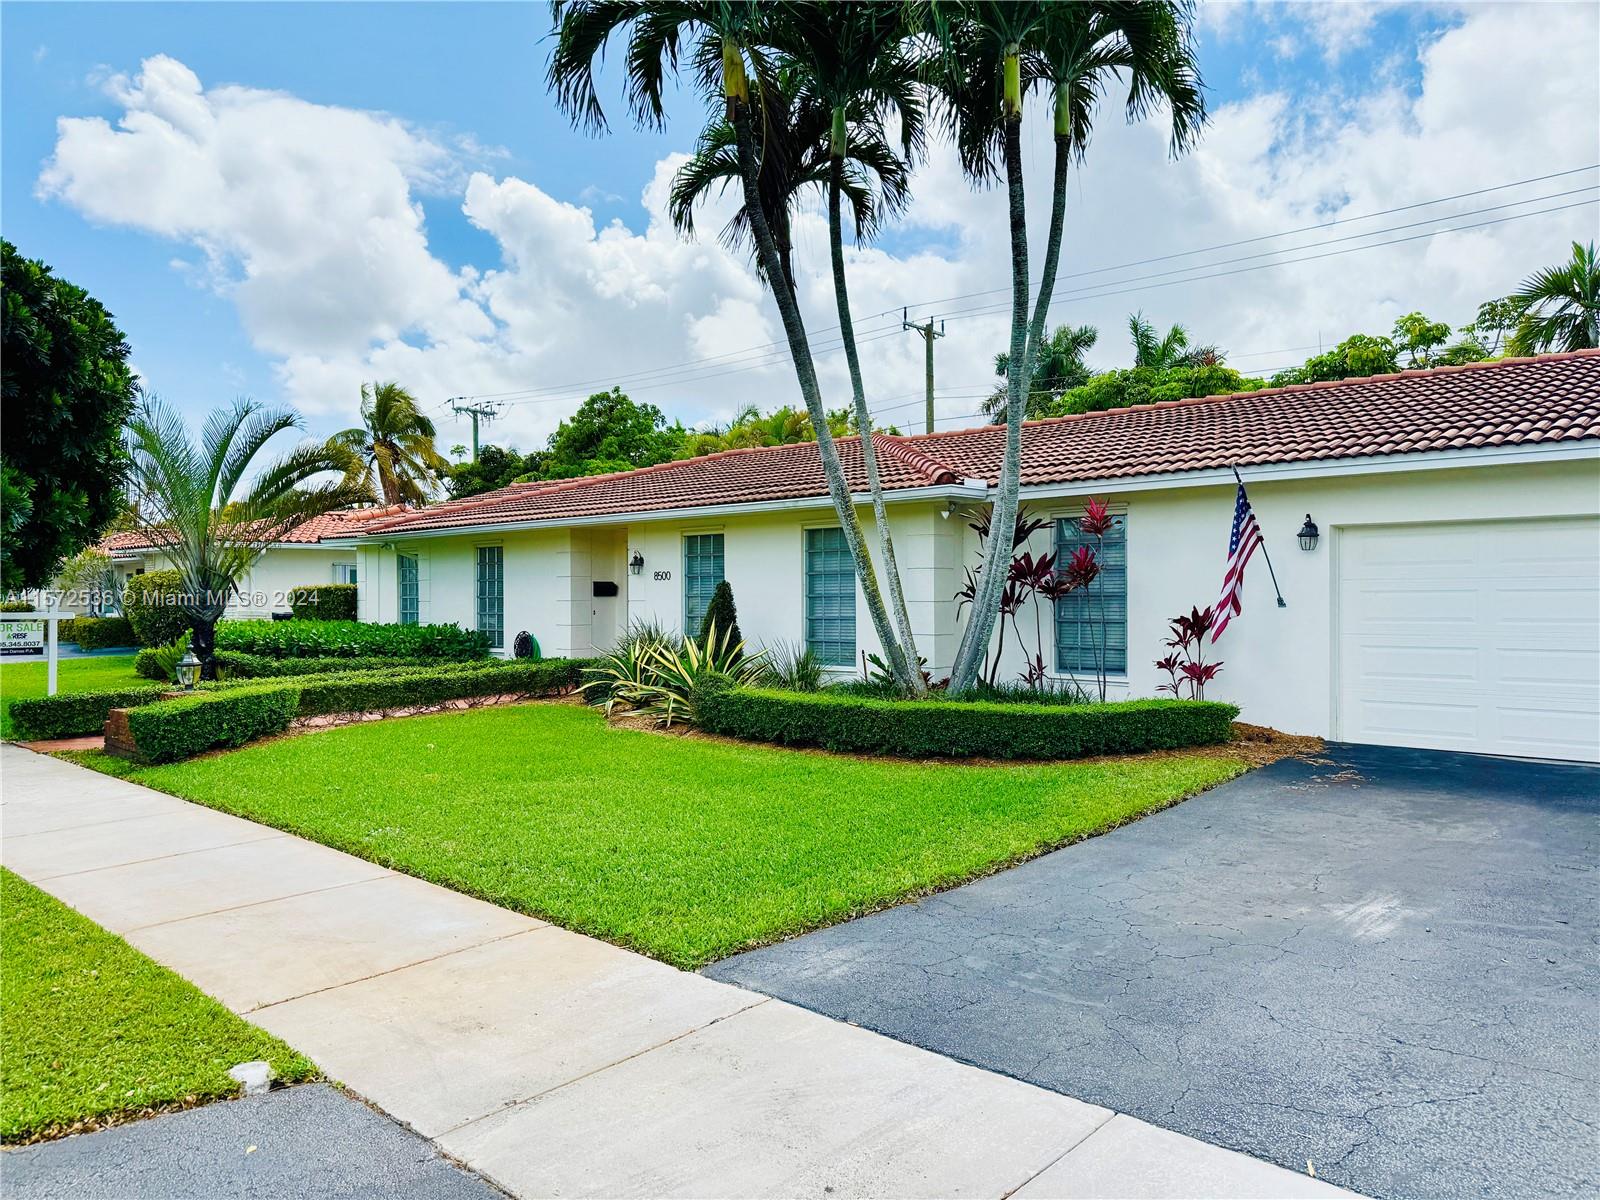 Property for Sale at 8500 Sw 86 Court Ct, Miami, Broward County, Florida - Bedrooms: 4 
Bathrooms: 2  - $990,000